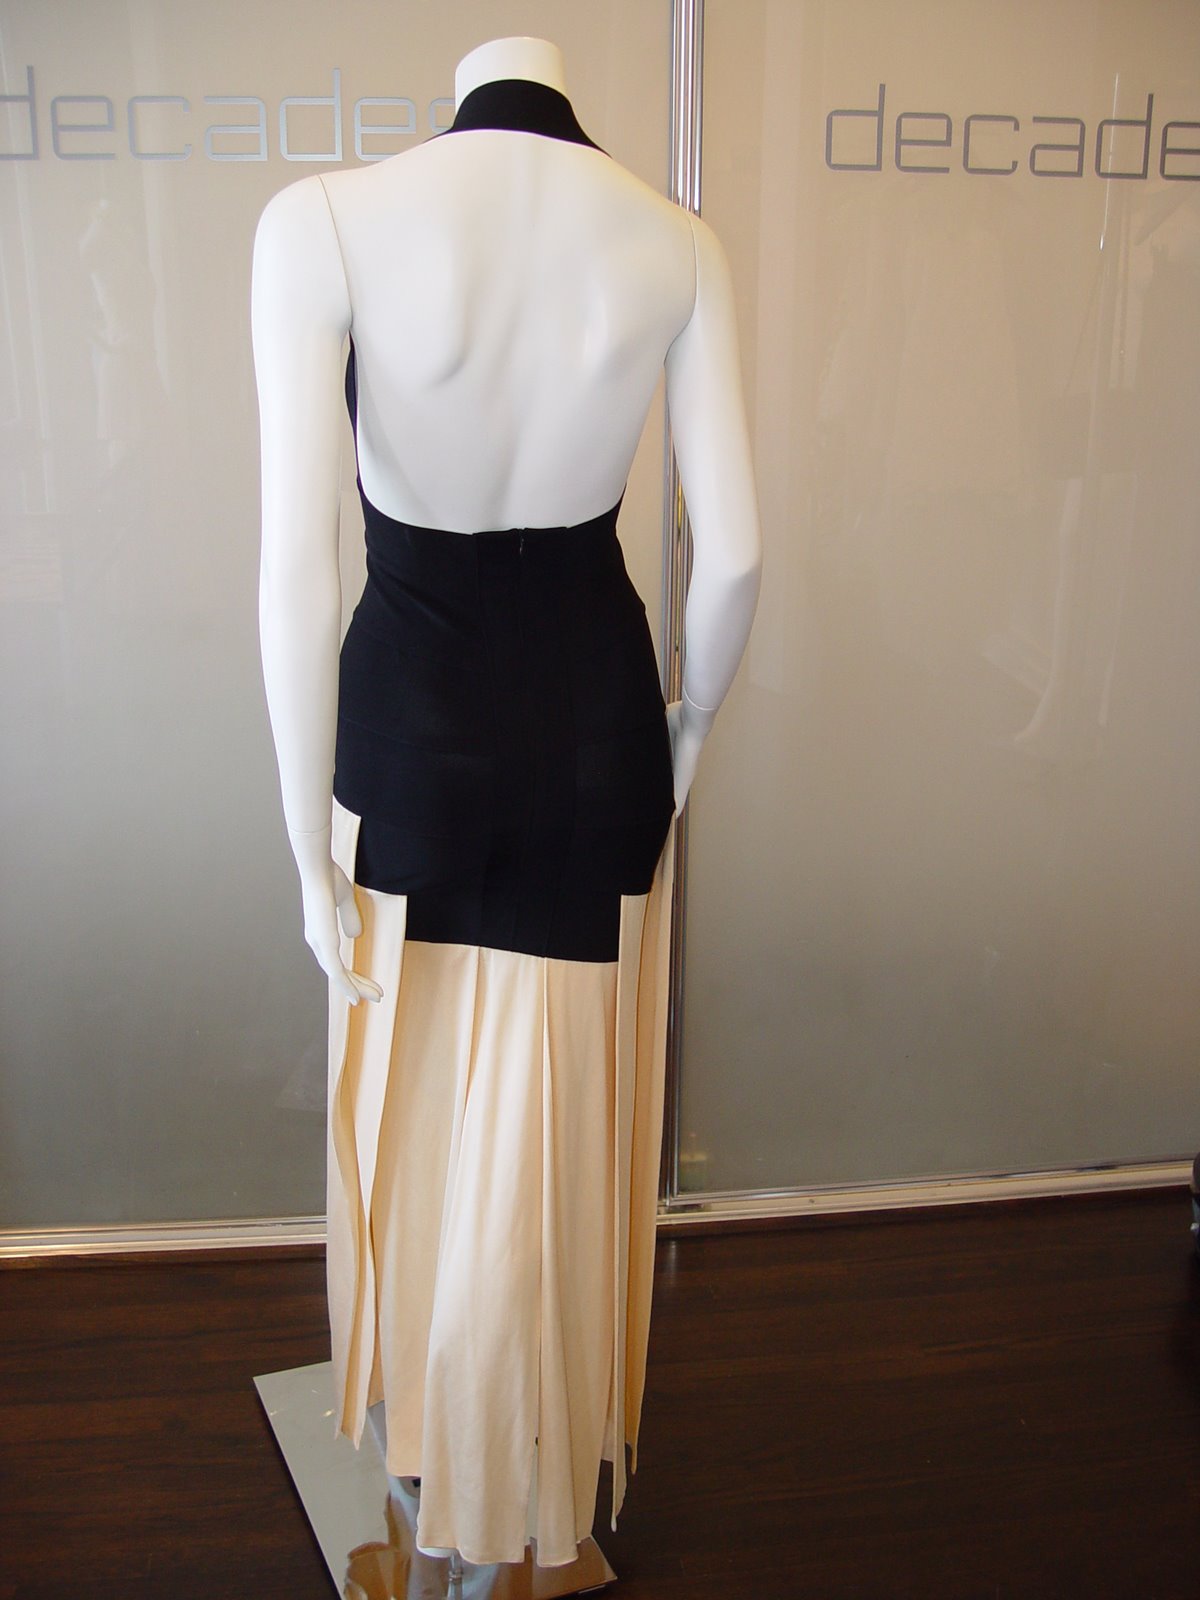 [HERVE+LEGER+COUTURE+EARLY+90S+BLACK+DRAMATIC+BANDAGE+HALTER+DRESS+WITH+VISCOSE+CREAM+JERSEY+SKIRT+MARKED+SIZE+S.JPG.JPG]